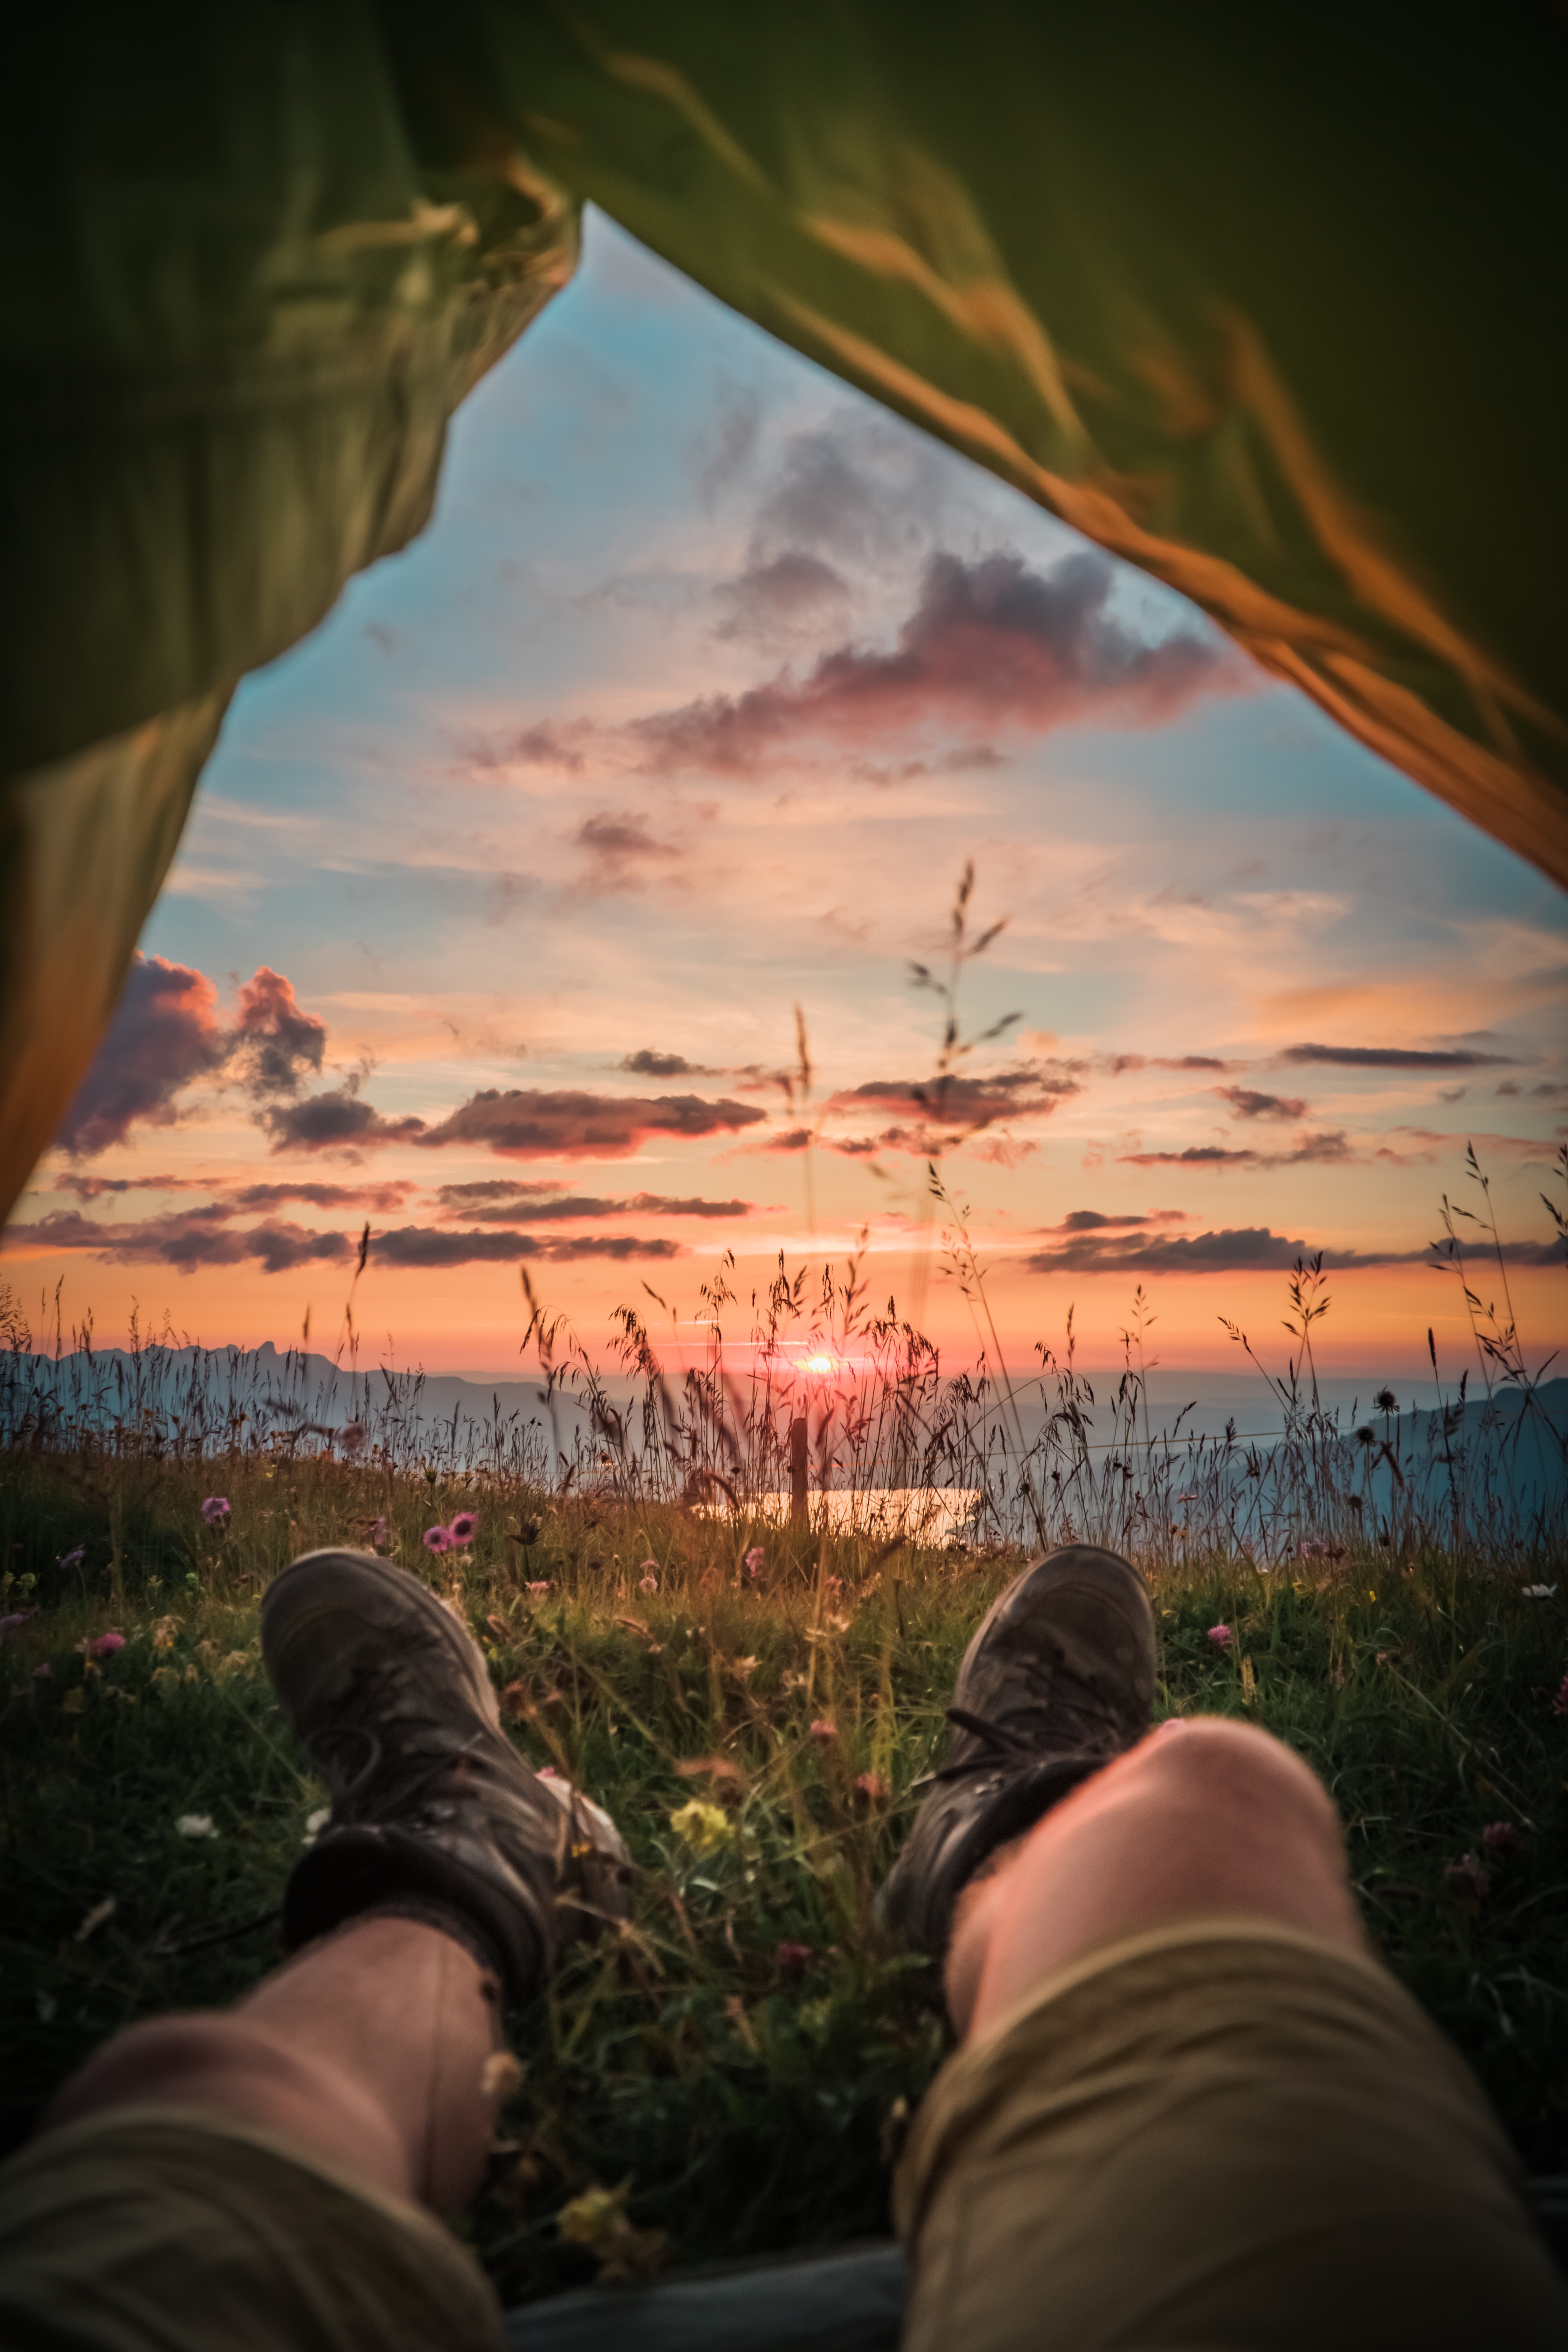 rest, campsite, dawn, miscellanea, miscellaneous, legs, relaxation, tent, camping